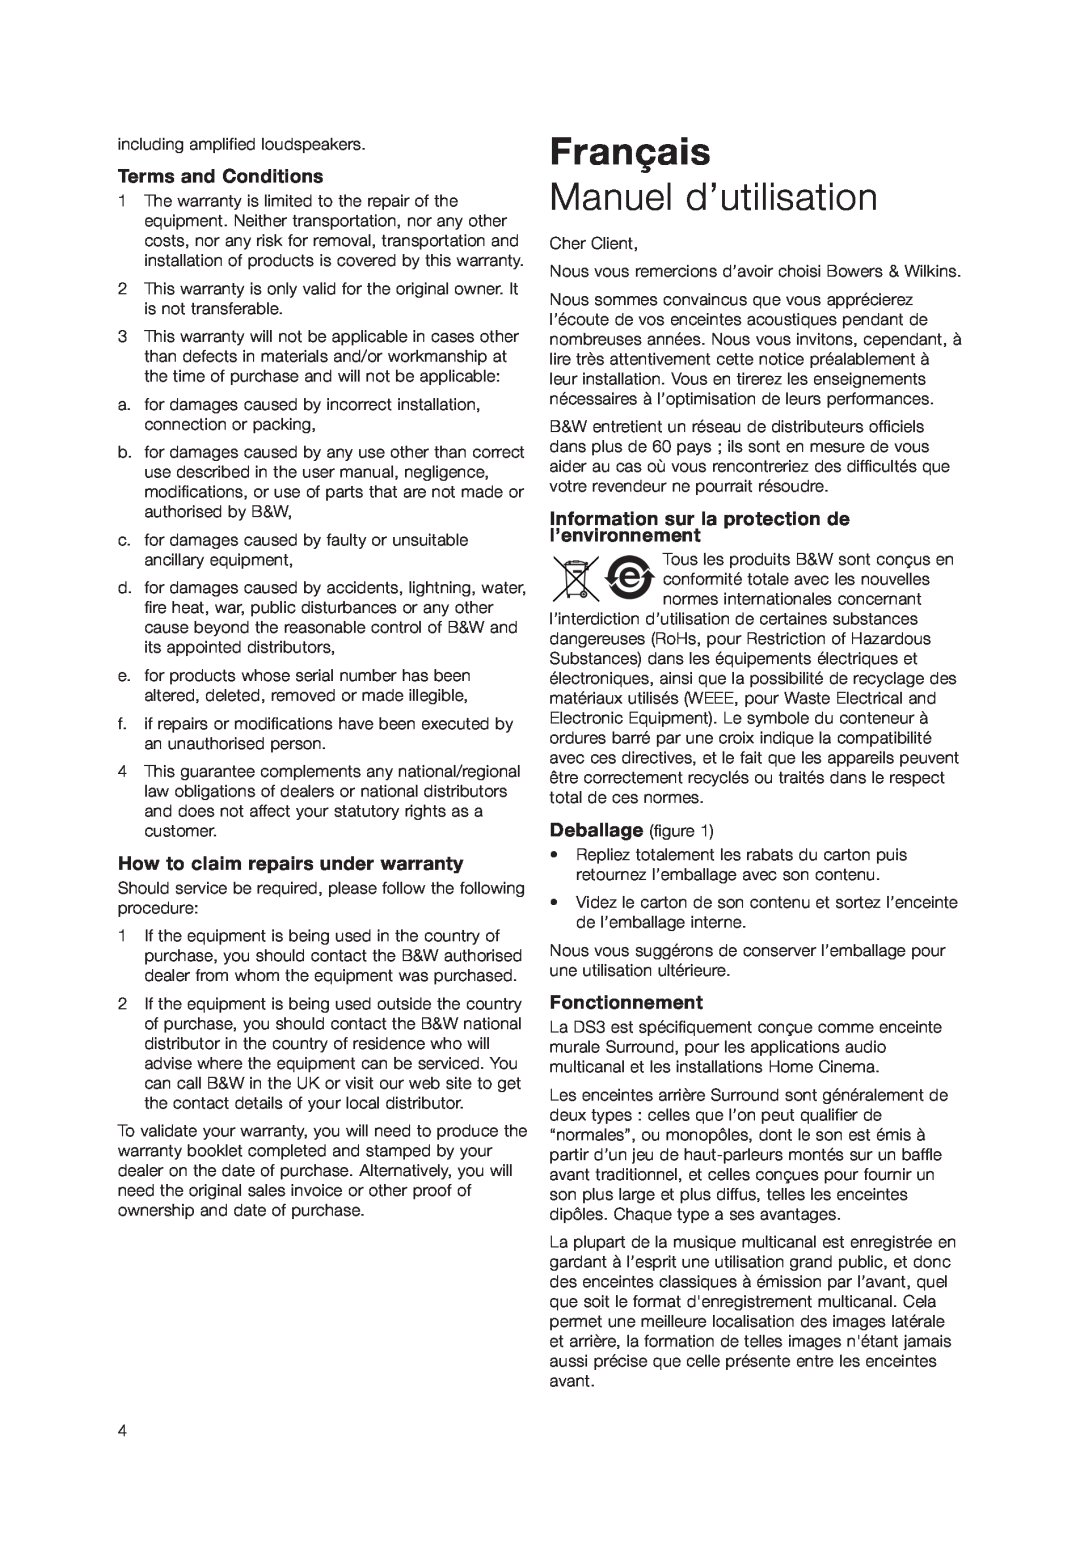 Bowers & Wilkins DS3 owner manual Français, Manuel d’utilisation, Terms and Conditions, How to claim repairs under warranty 